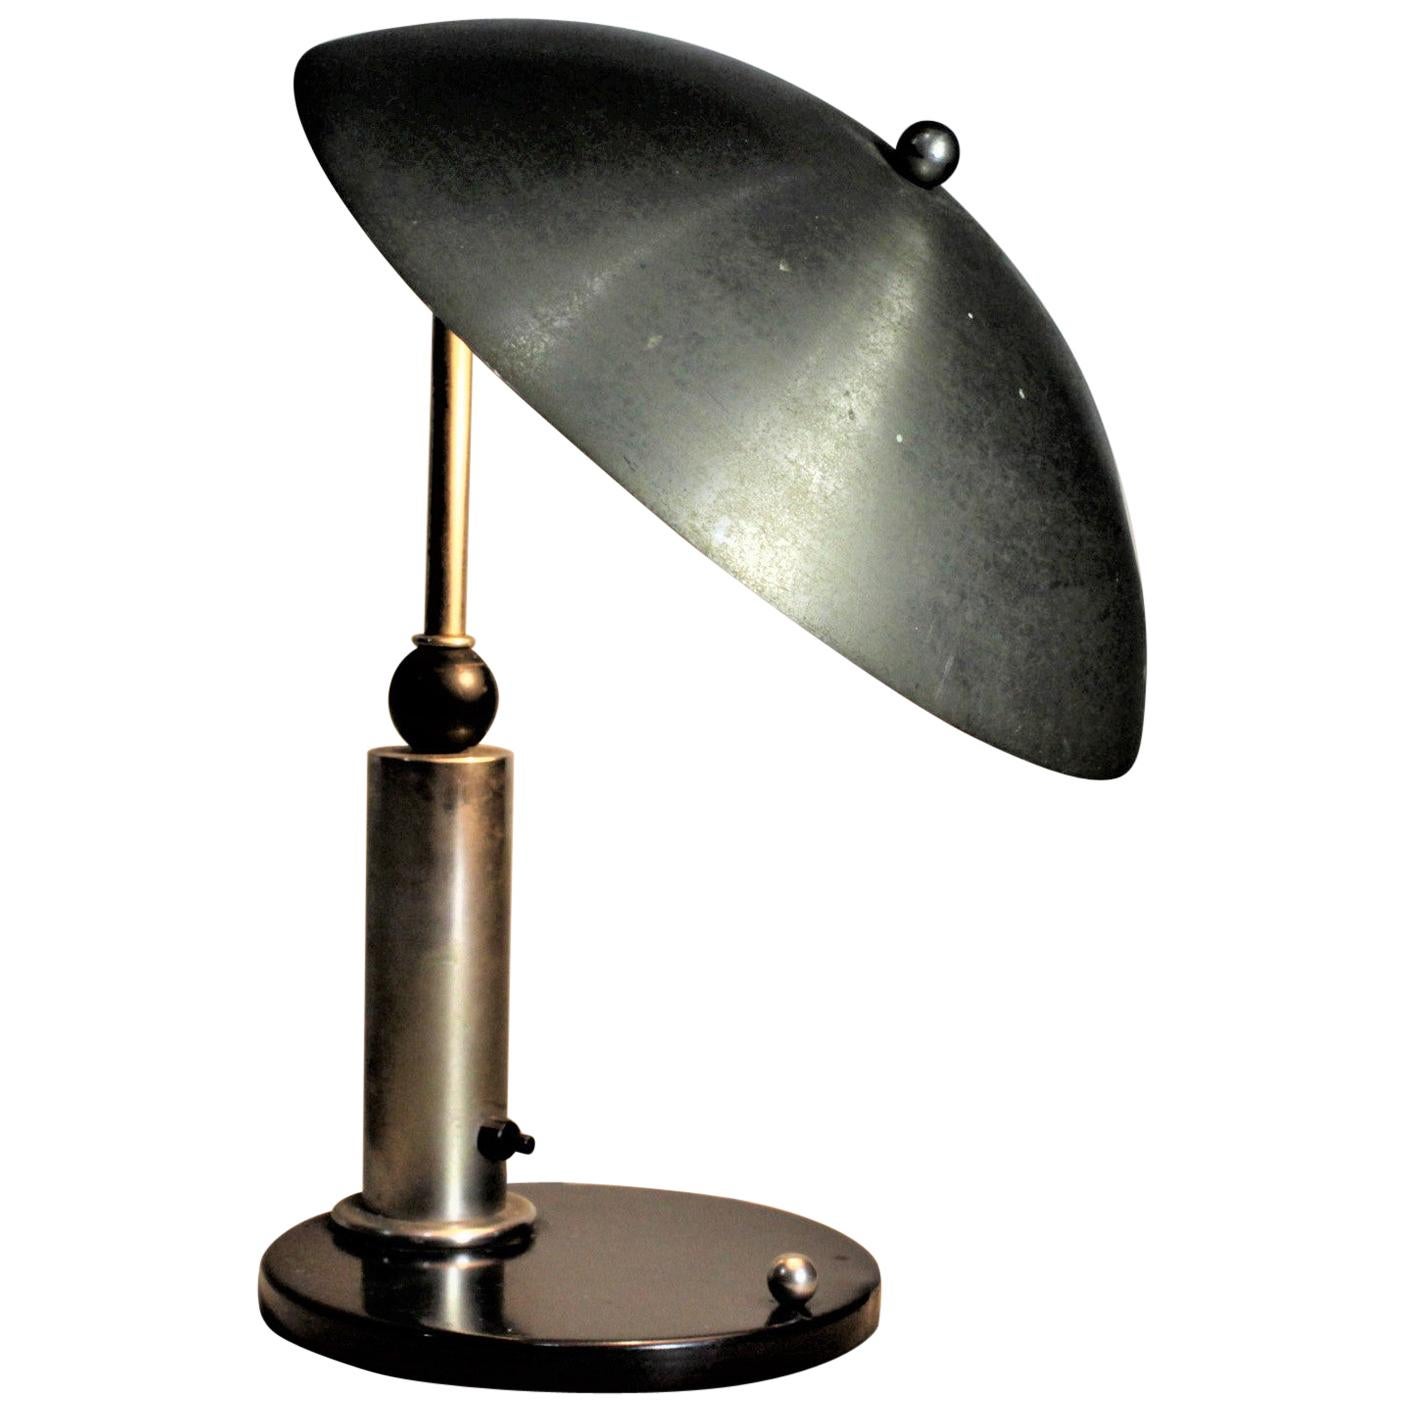 Mid-Century Modern Space Age Flying Saucer Styled Desk or Table Lamp